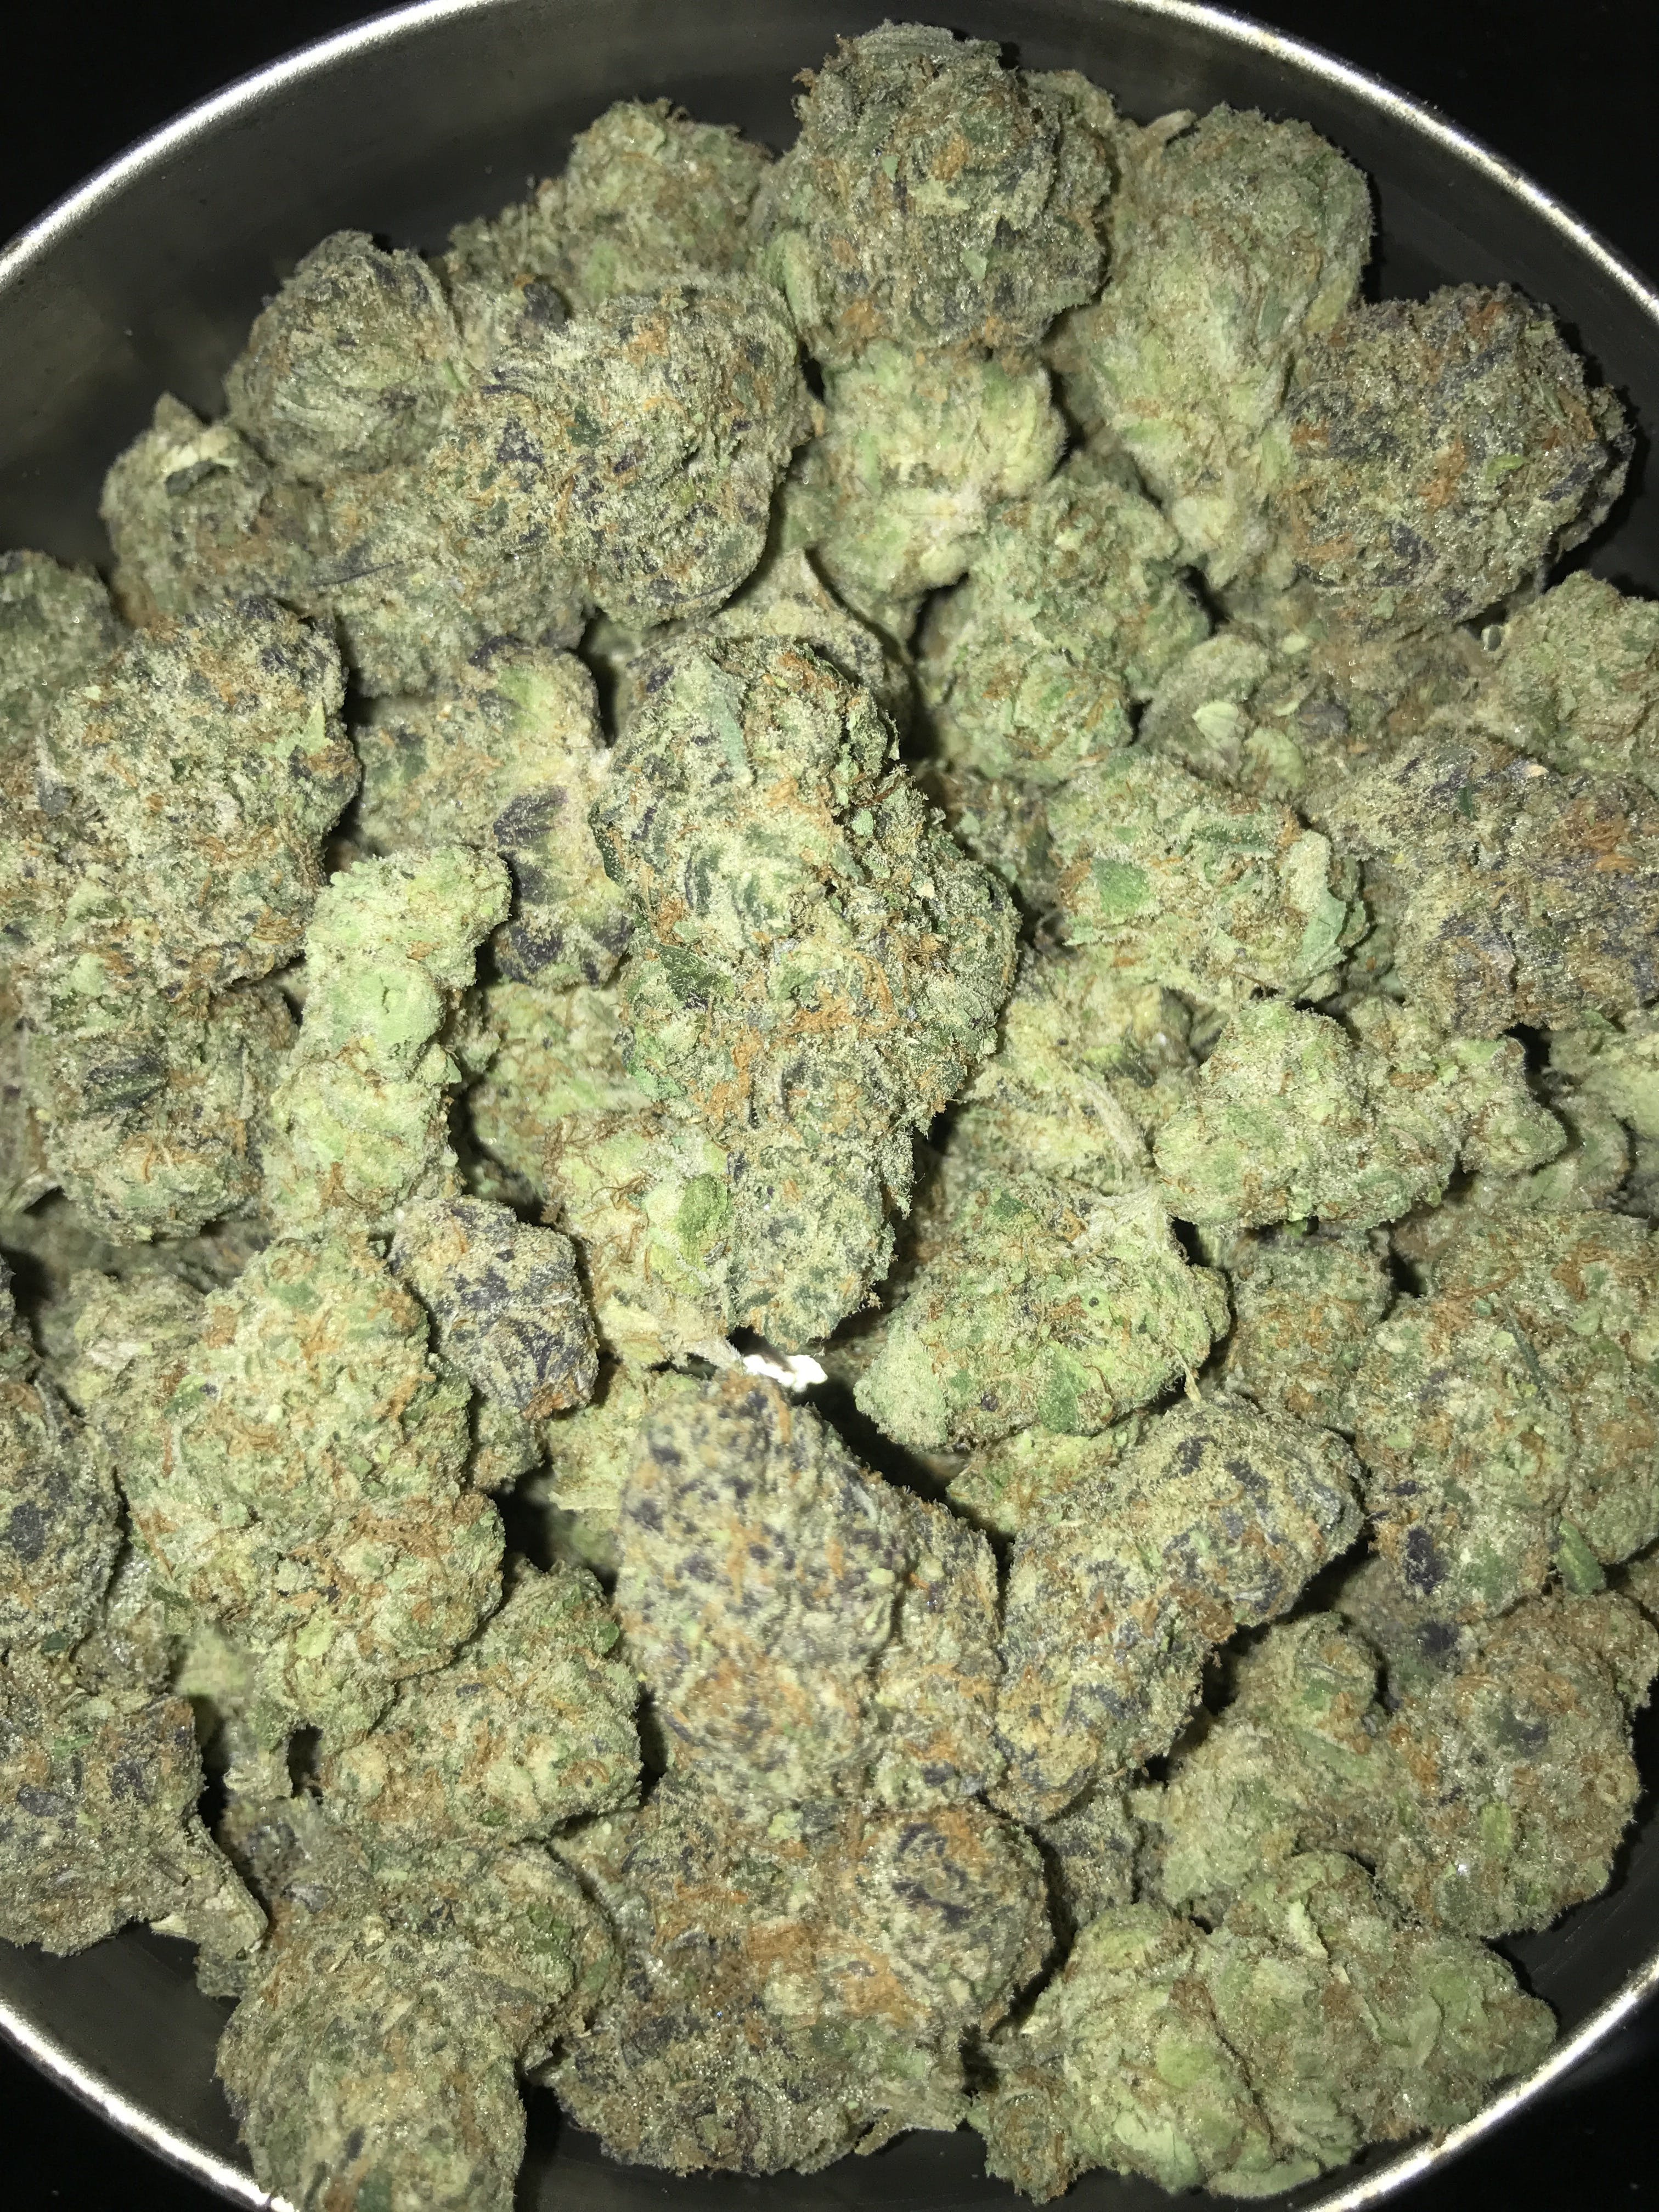 GIRL SCOUT COOKIES (EXCLUSIVE)